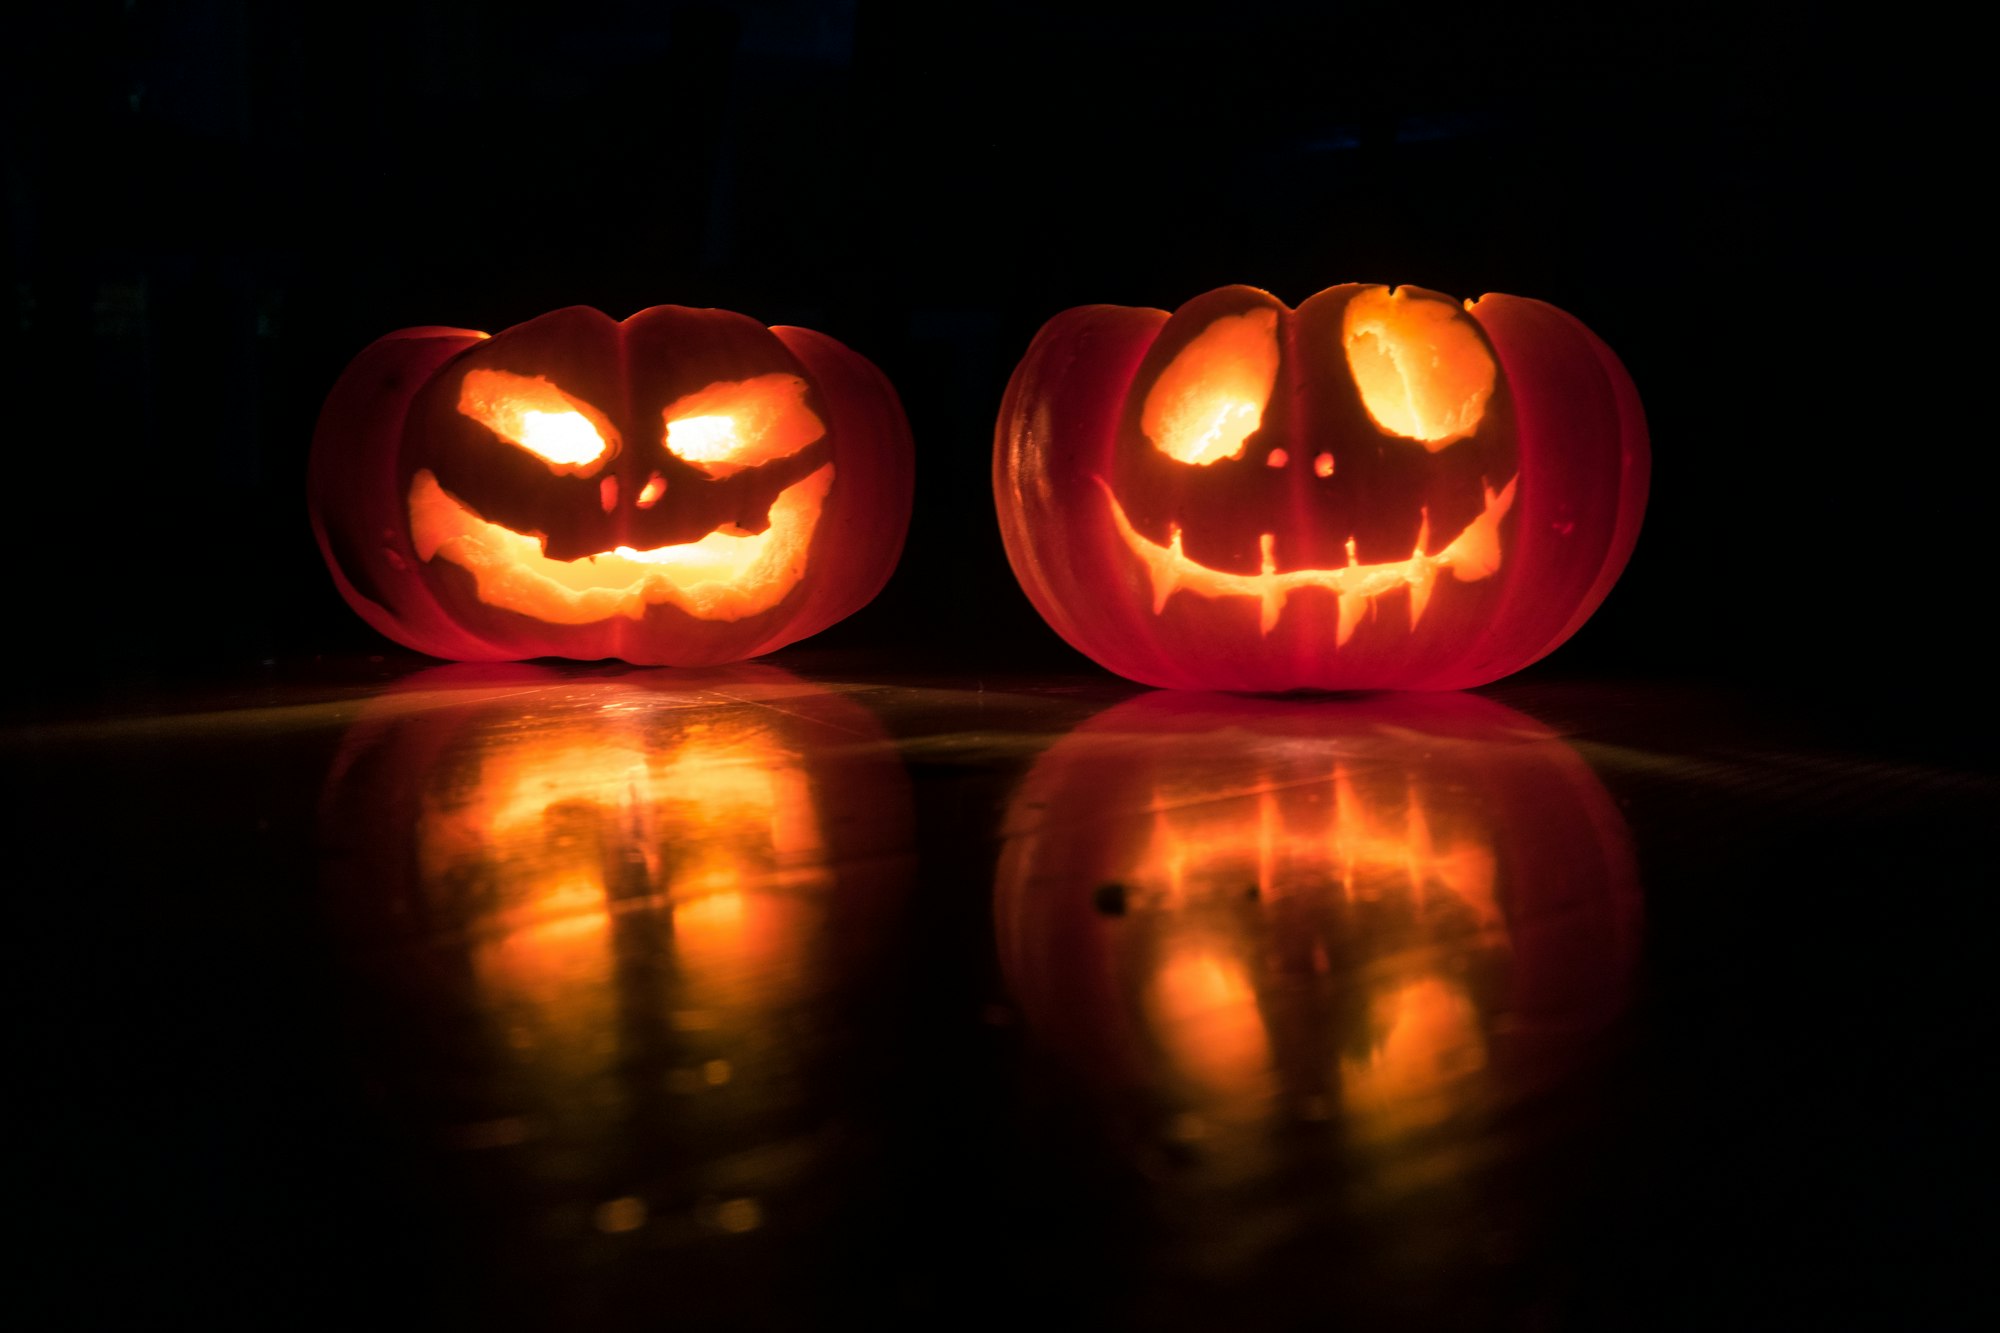 Should There Be Social Distancing At Halloween?